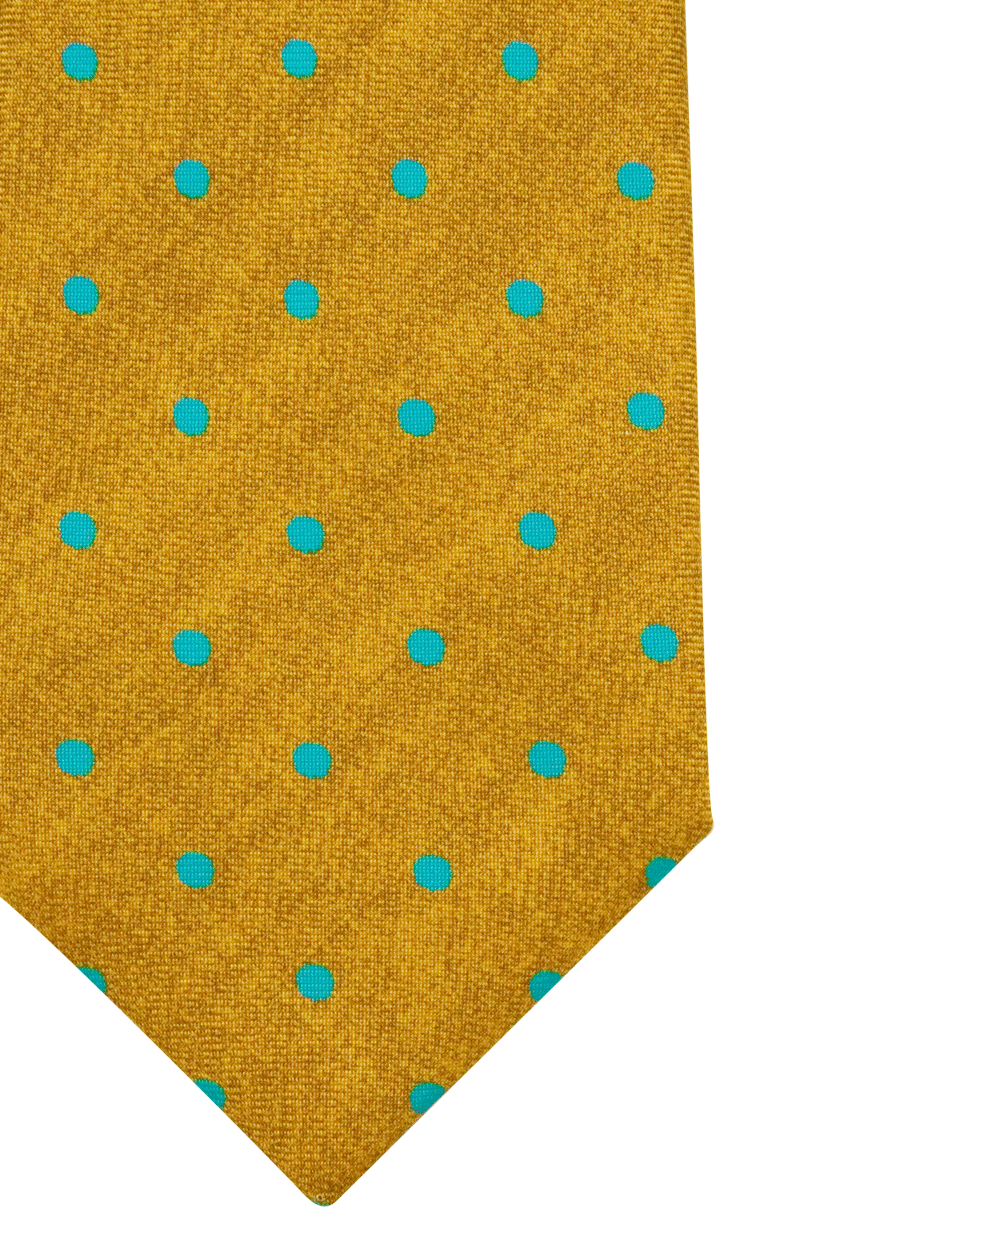 Gold and Aqua Dotted Tie